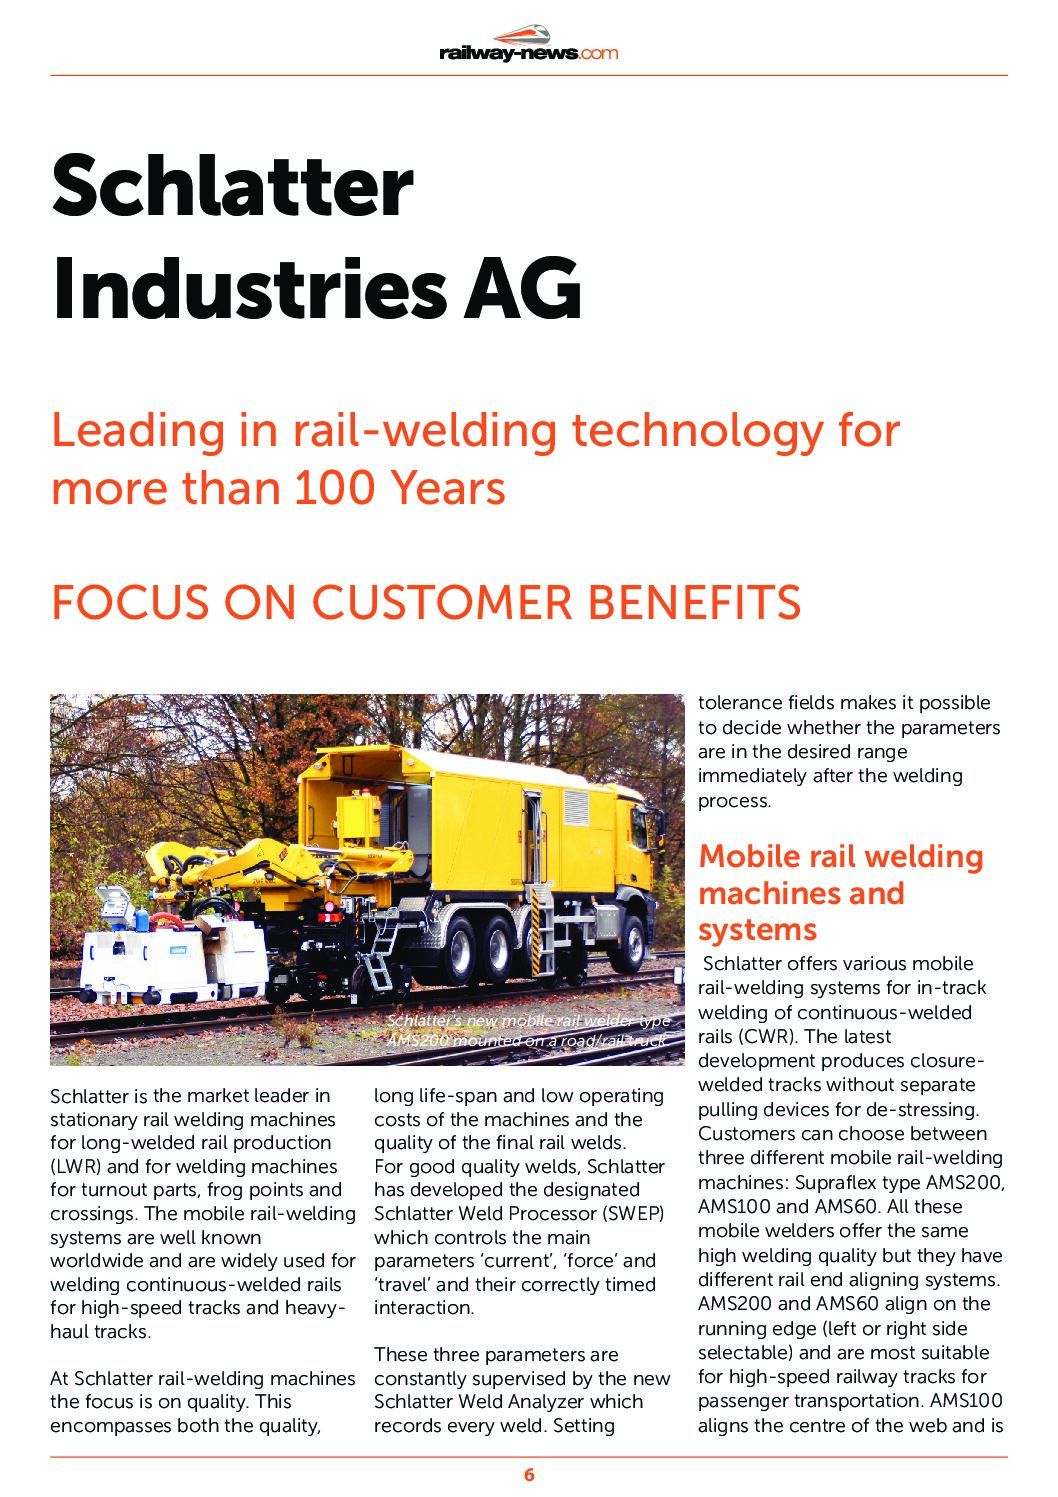 Leading in Rail Welding Technology for 100 Years